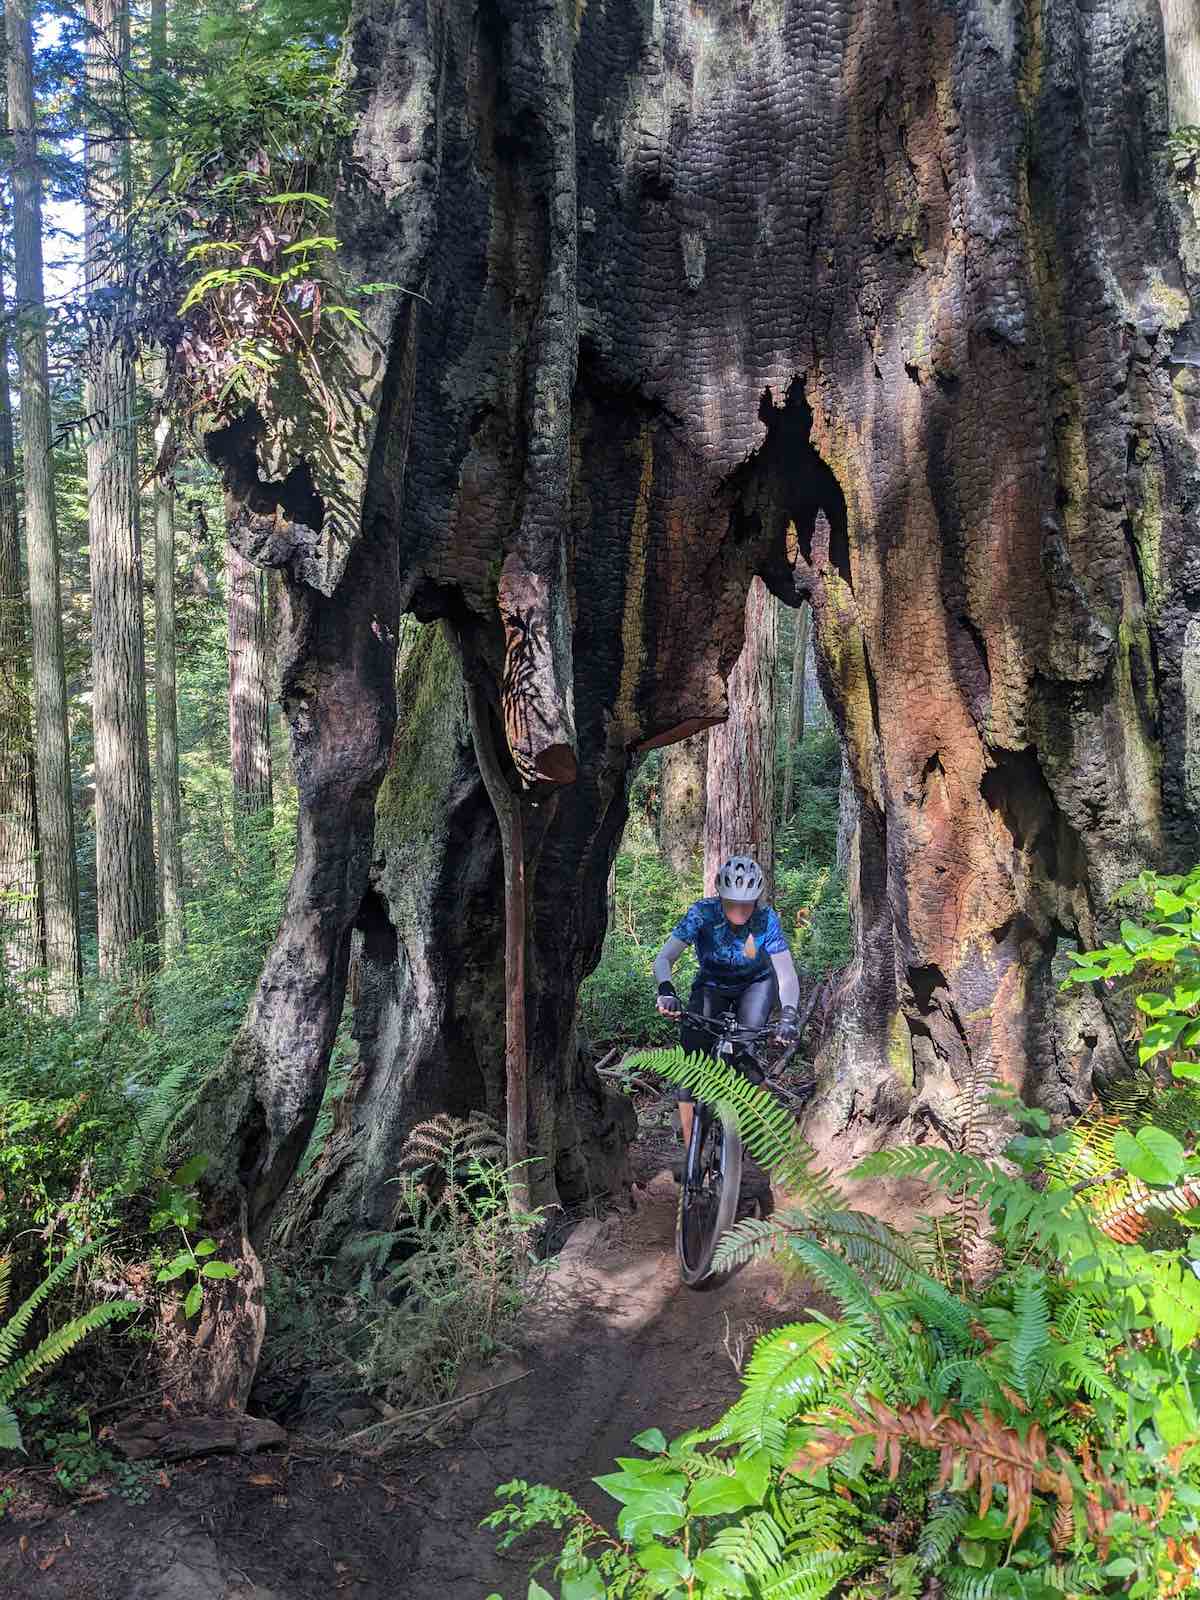 bikerumor pic of the day a mountain biker is riding through a redwood tree stump in a redwood forest